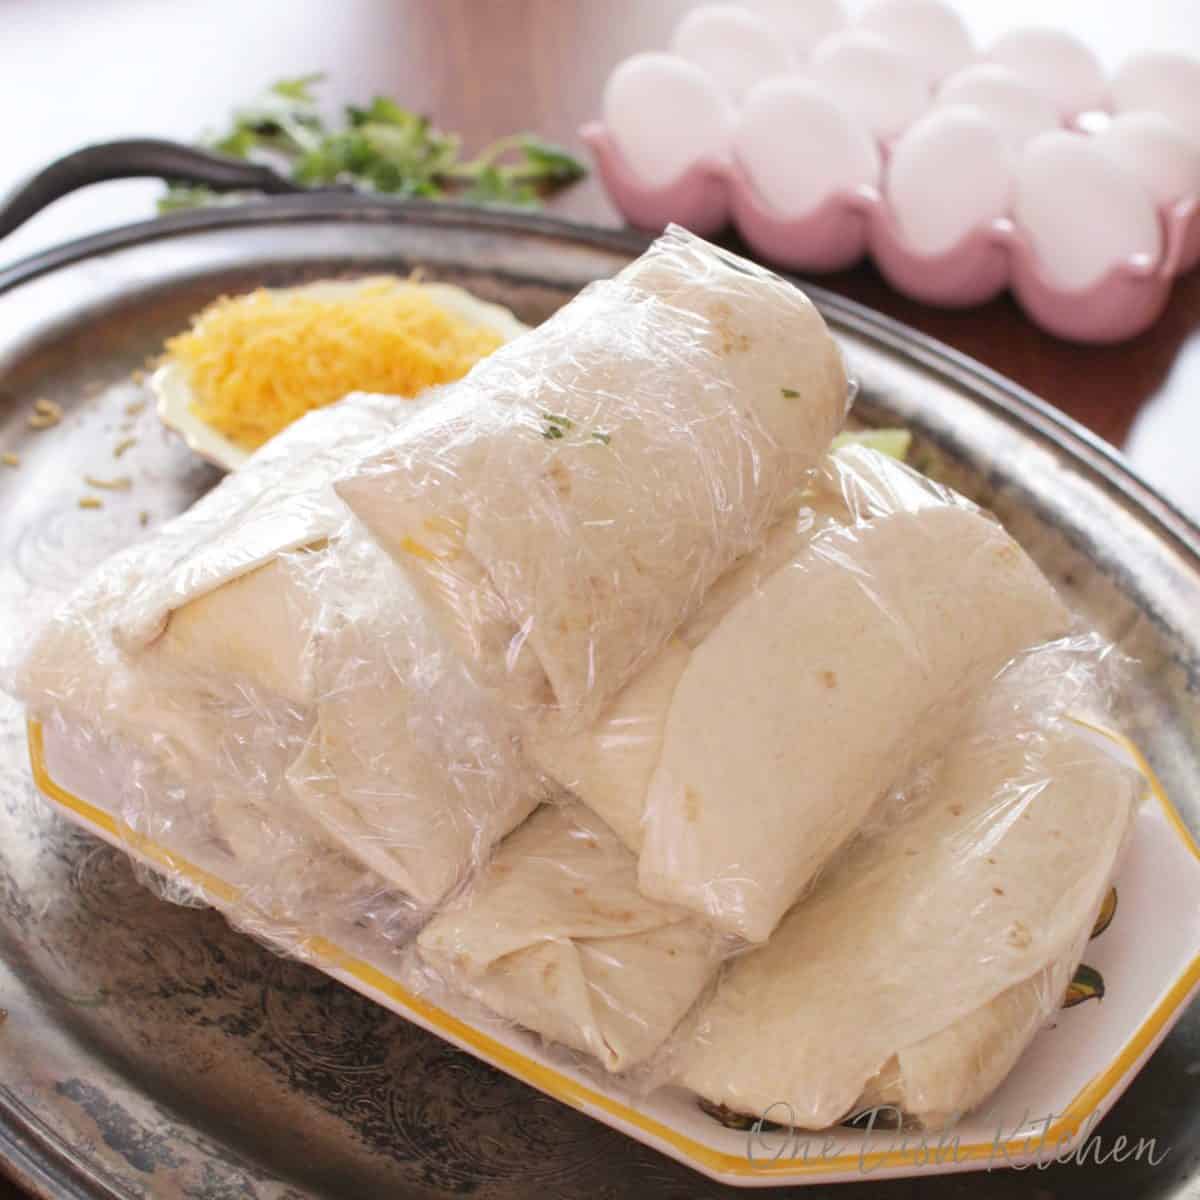 burritos individually wrapped in plastic wrap on a plate next to a pink tray filled with eggs.